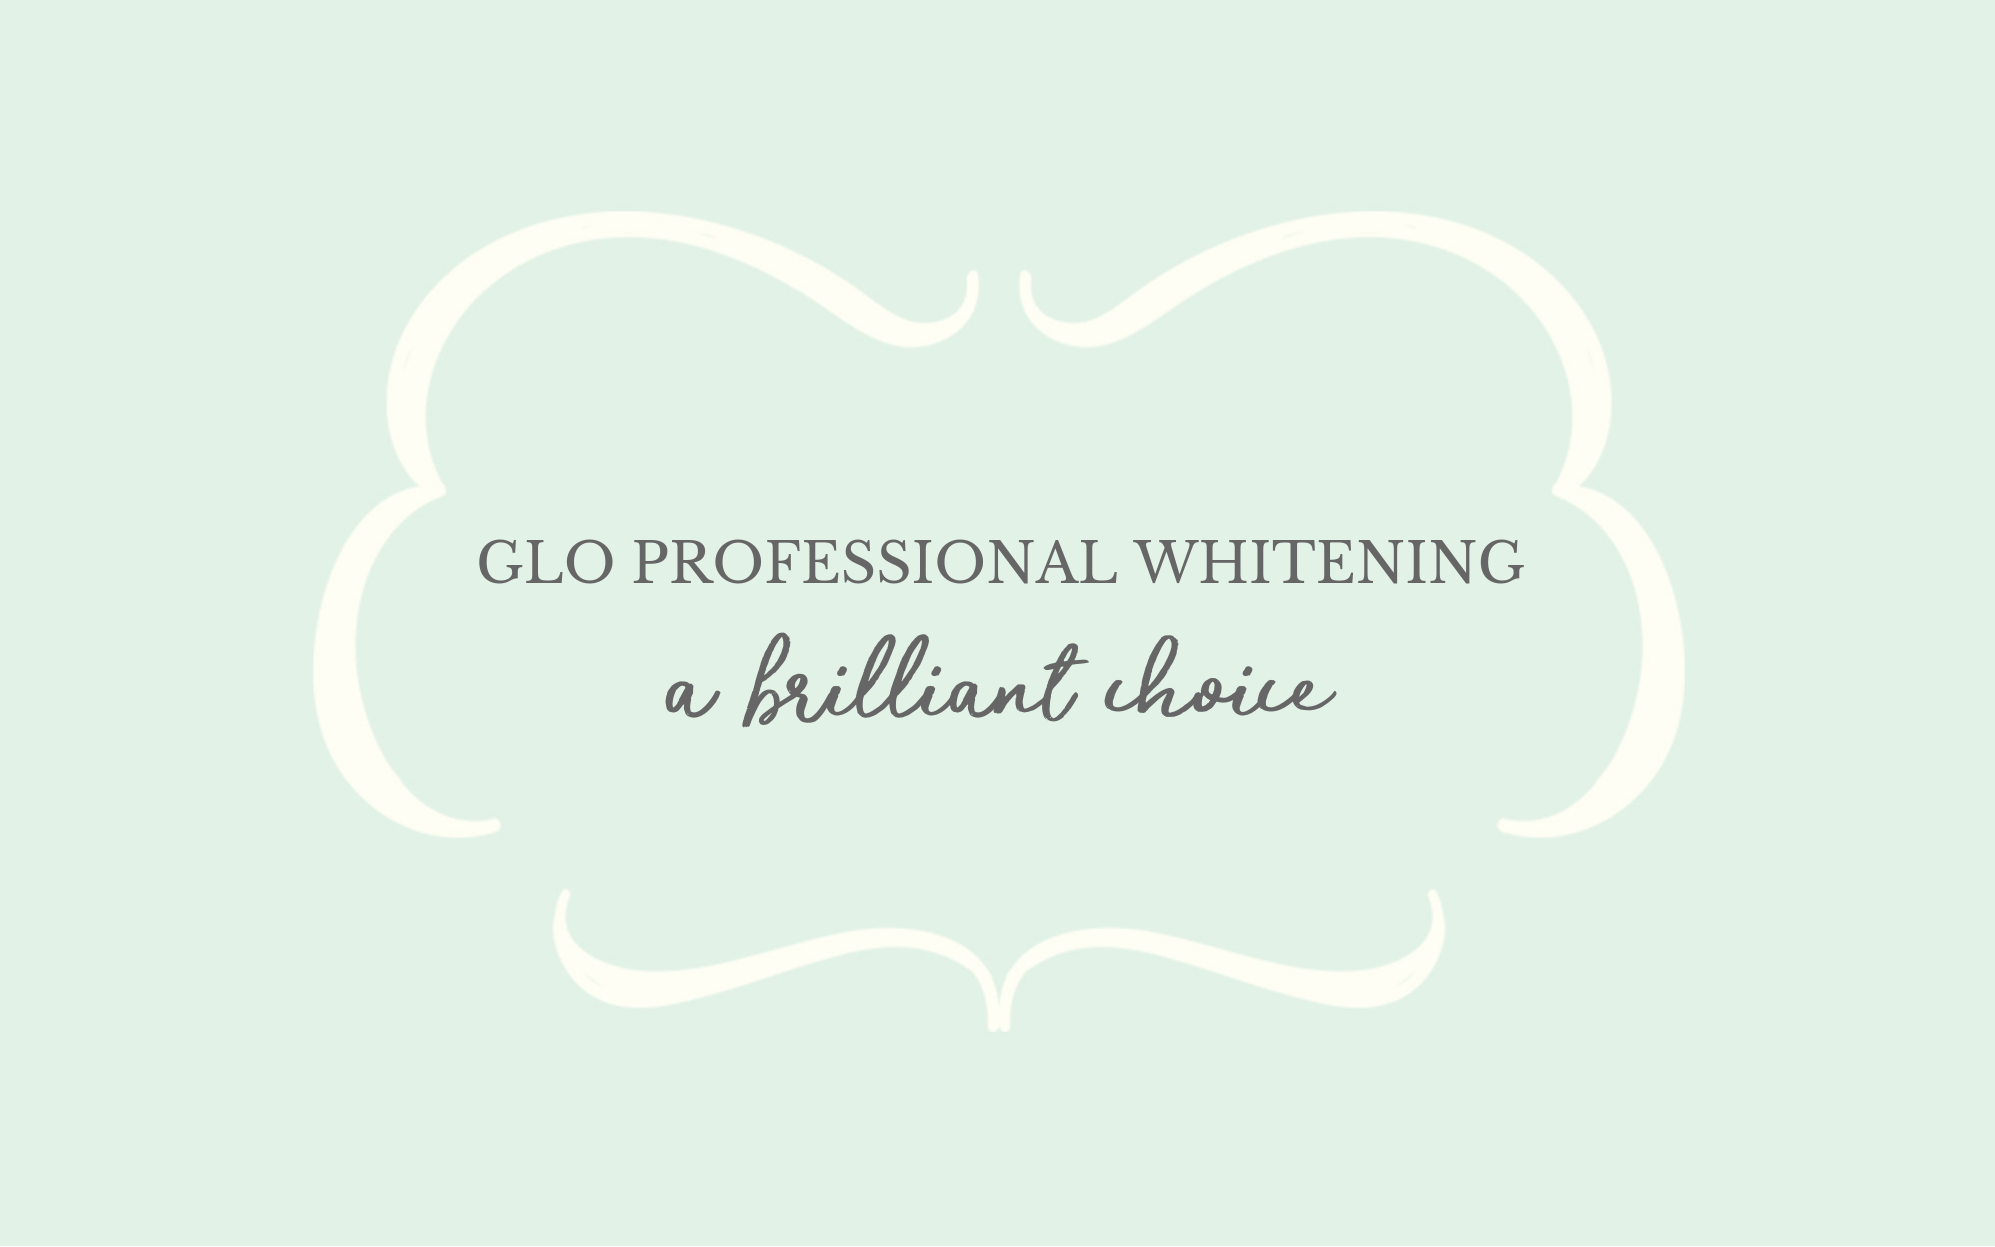 GLO Professional Whitening: A Brilliant Choice